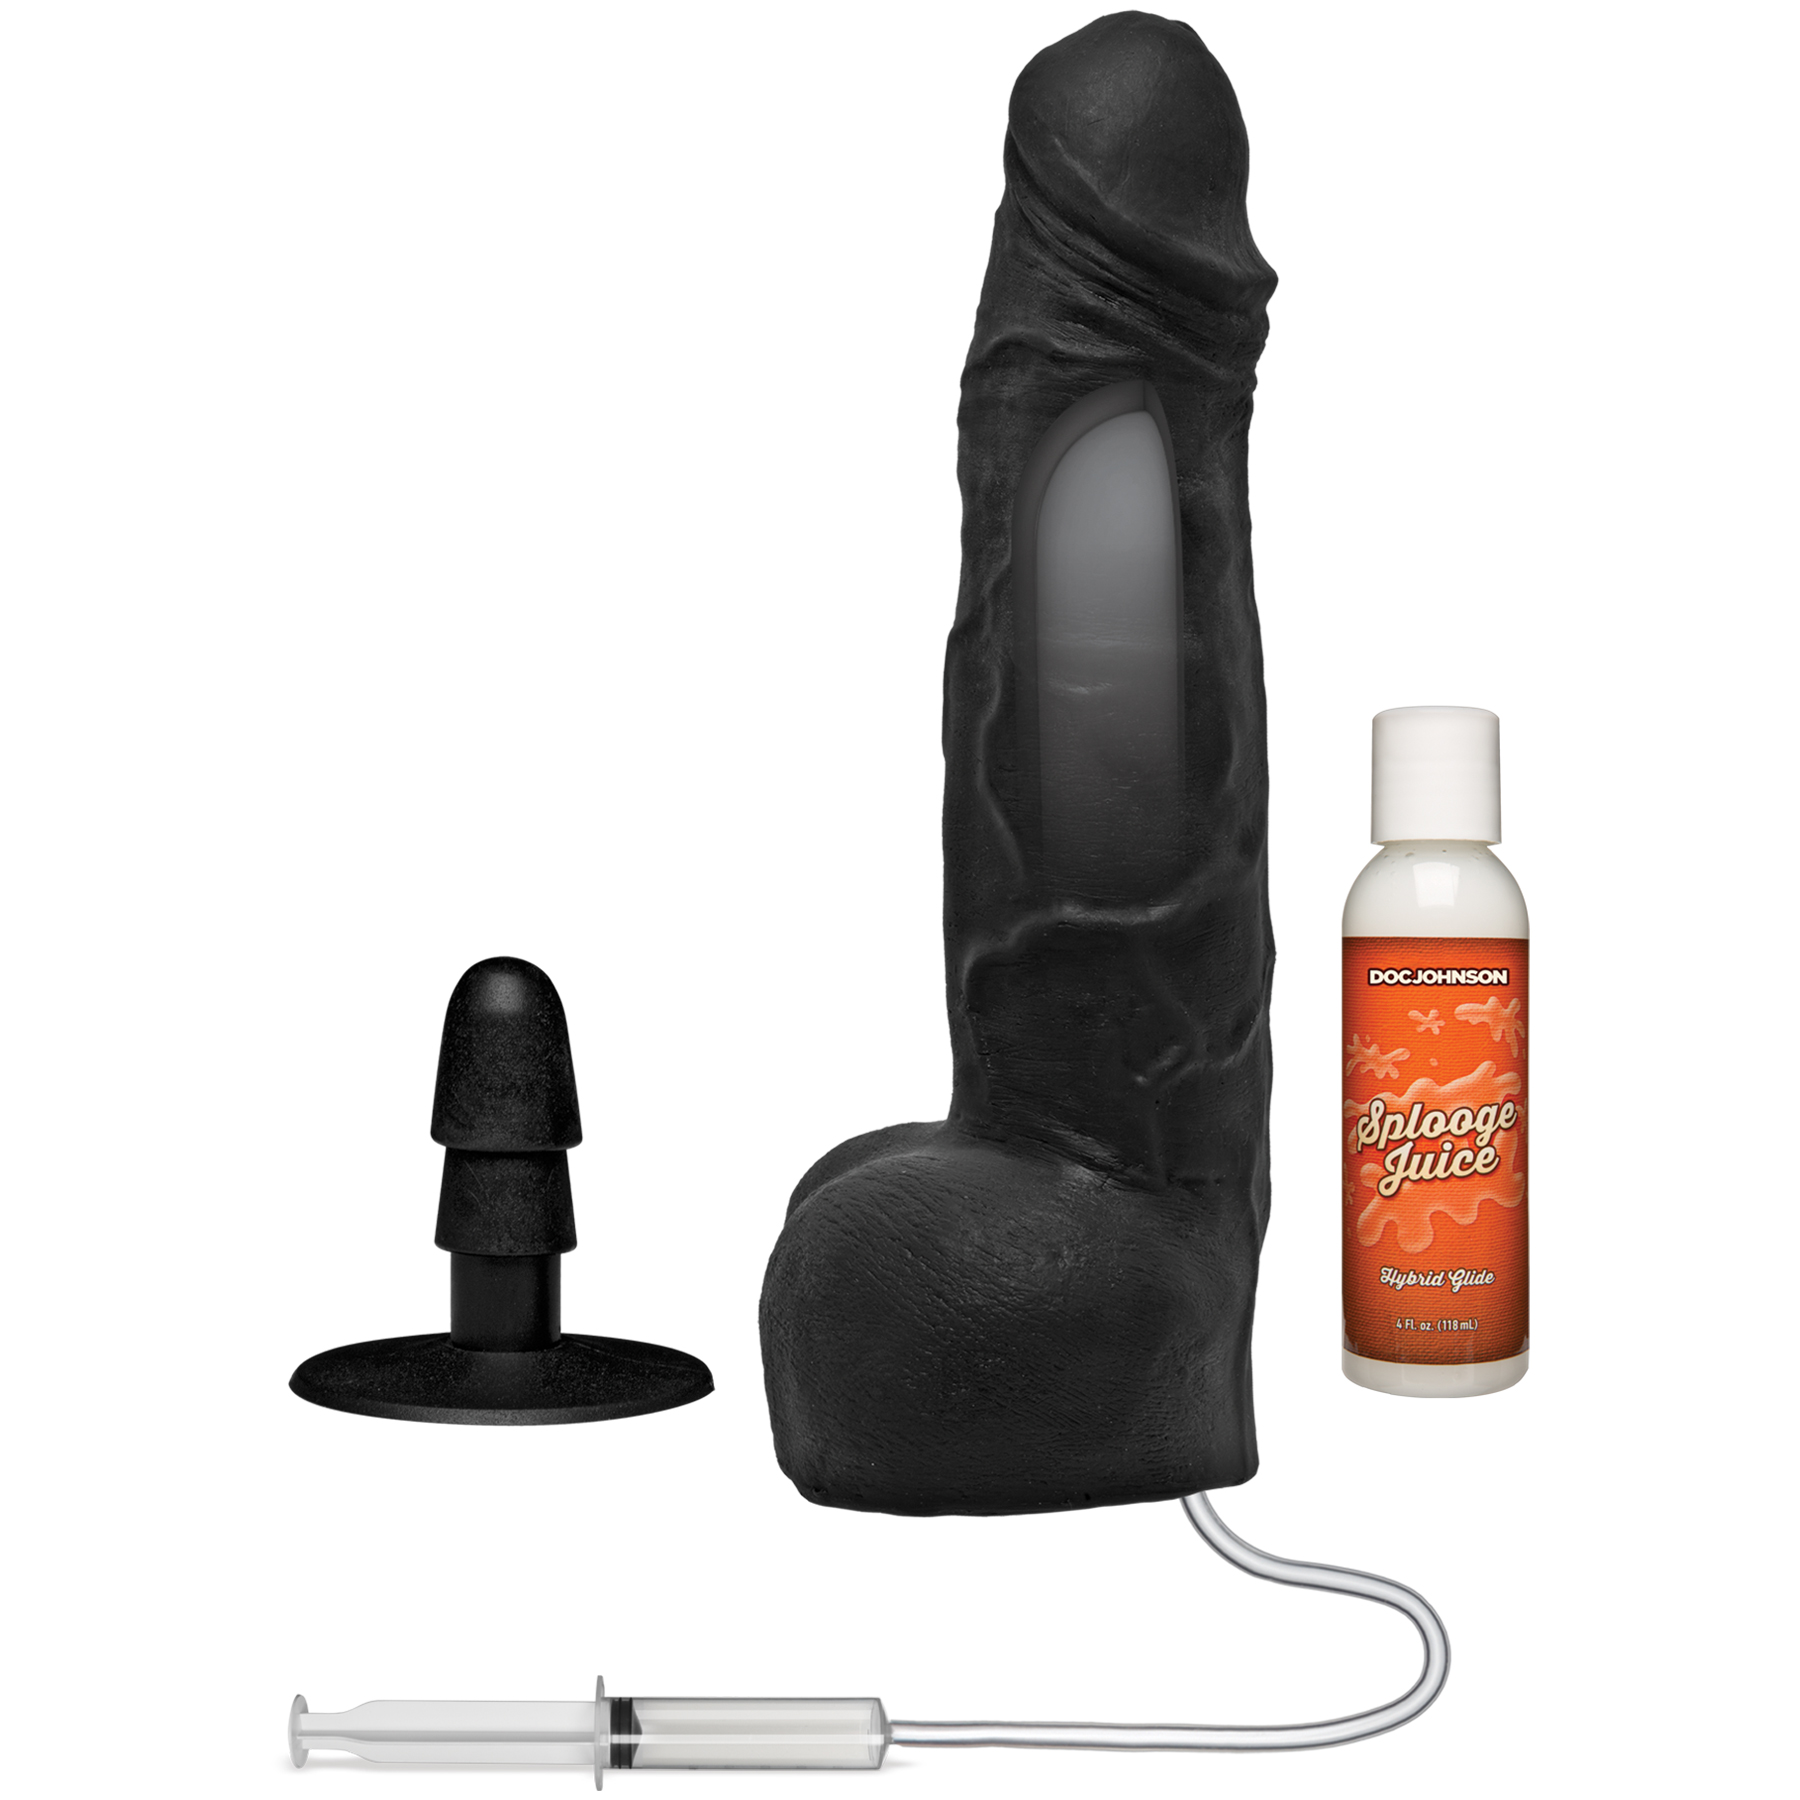 merci  inch dual density squirting cumplay  cock with removable vac u lock suction cup  black 